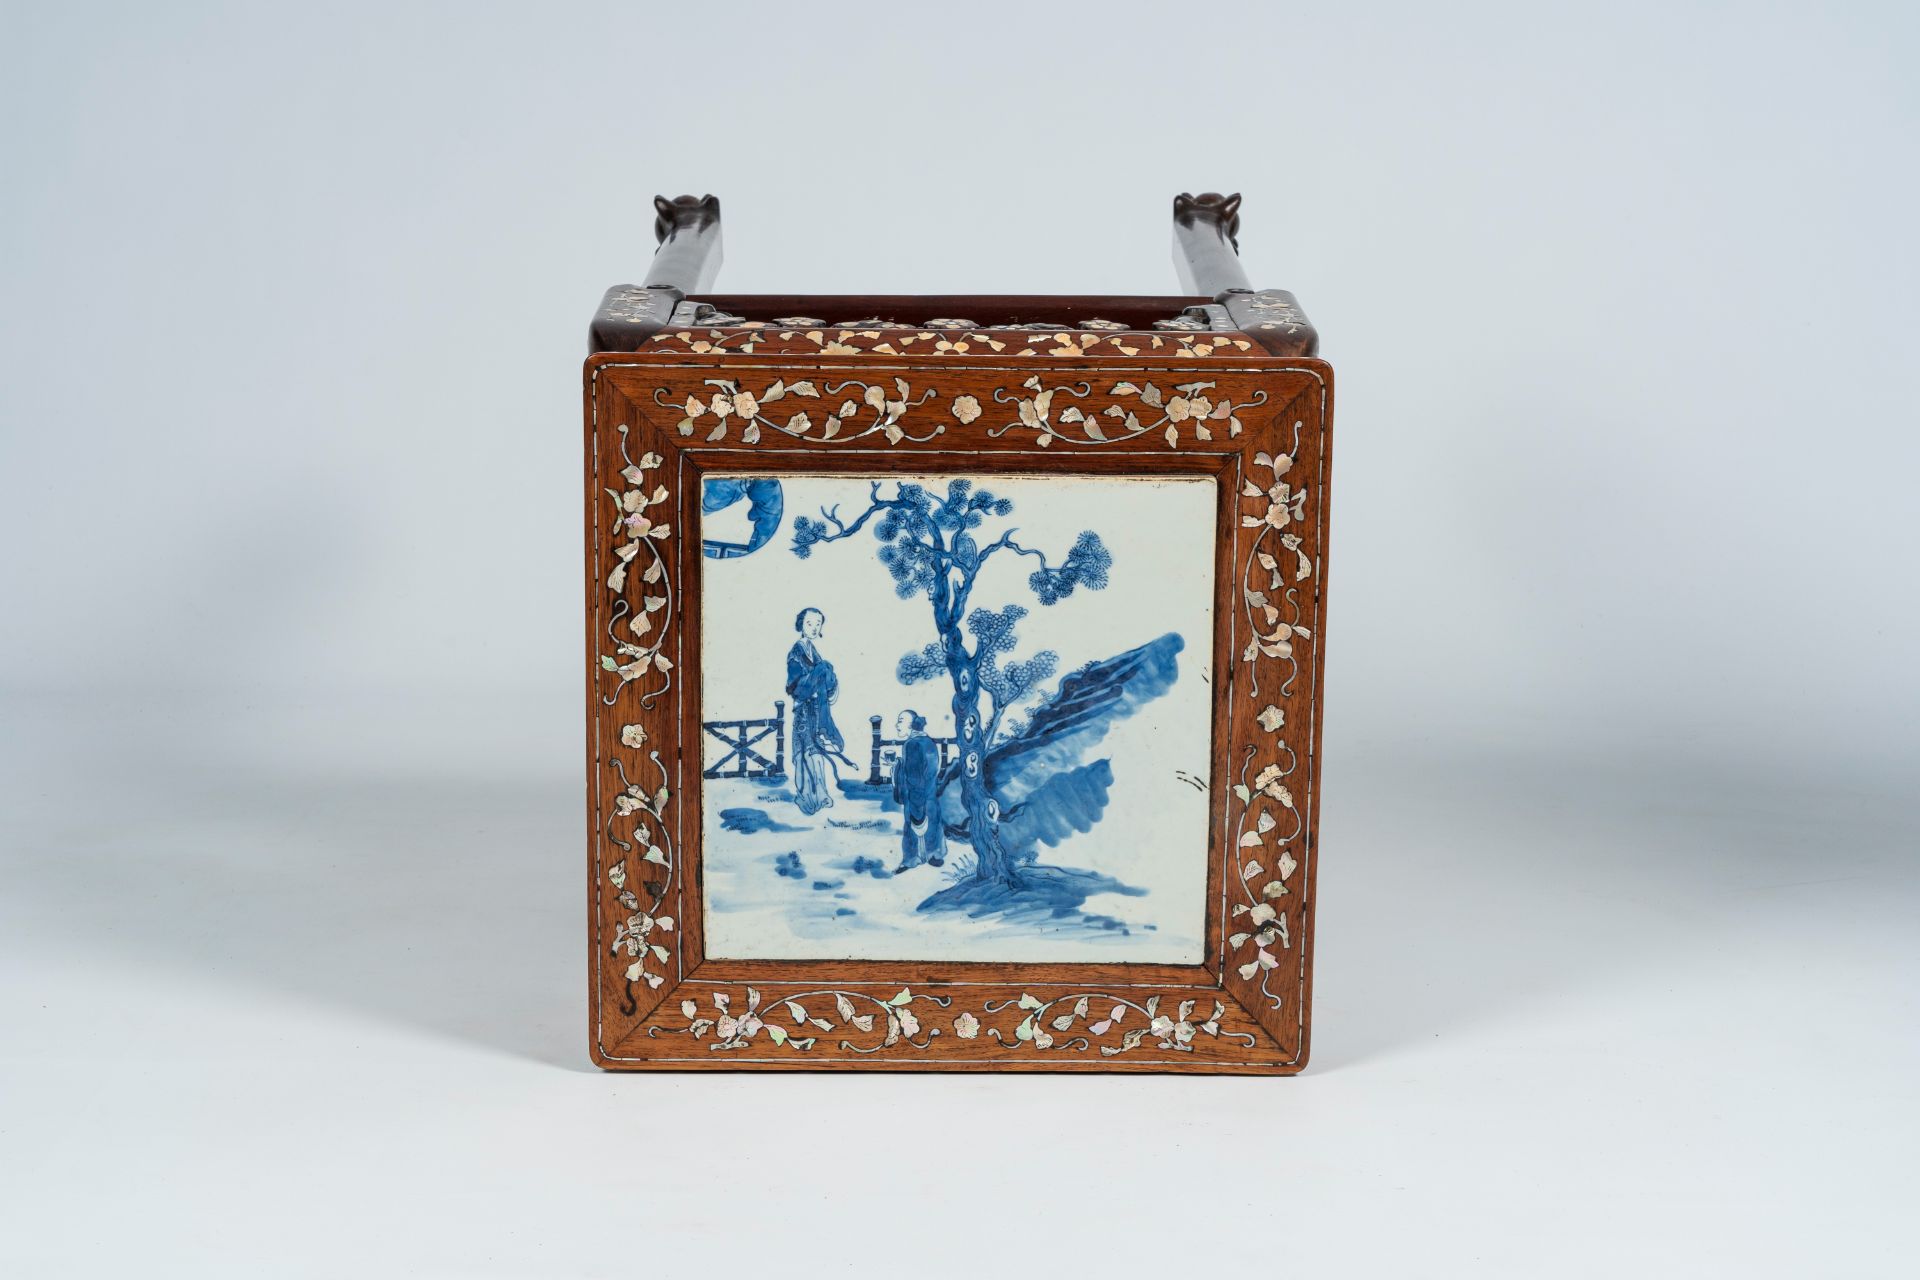 A Chinese mother-of-pearl-inlaid wooden stand with blue and white porcelain top, 19th C.